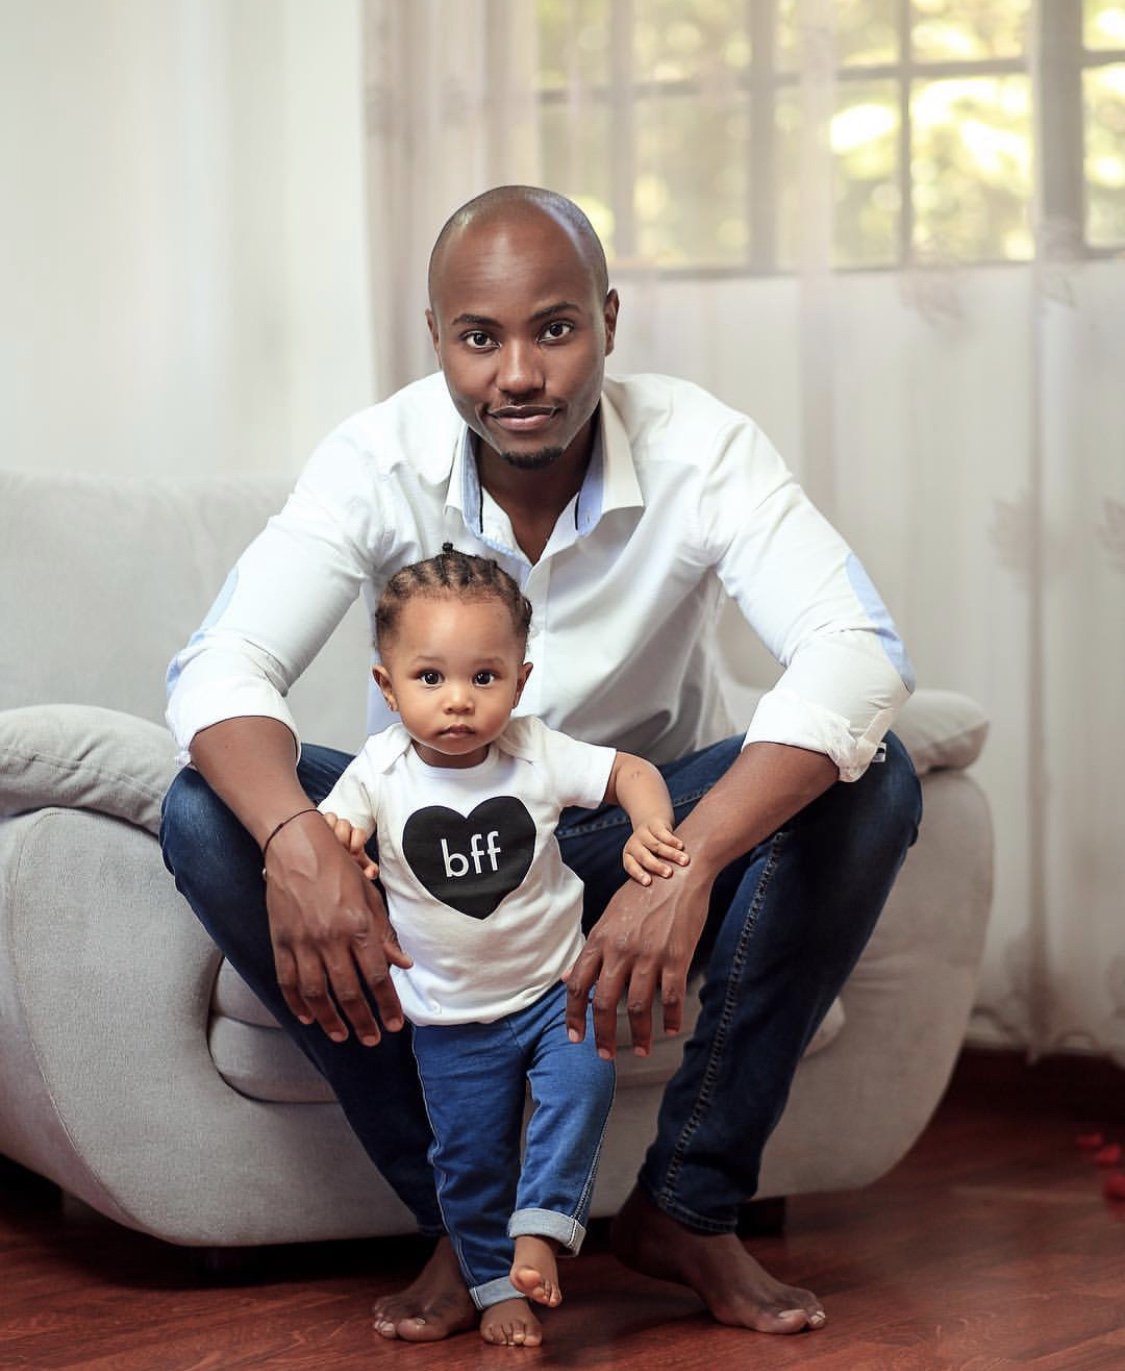 Actor Nick Mutuma and girlfriend celebrate their daughter’s first birthday